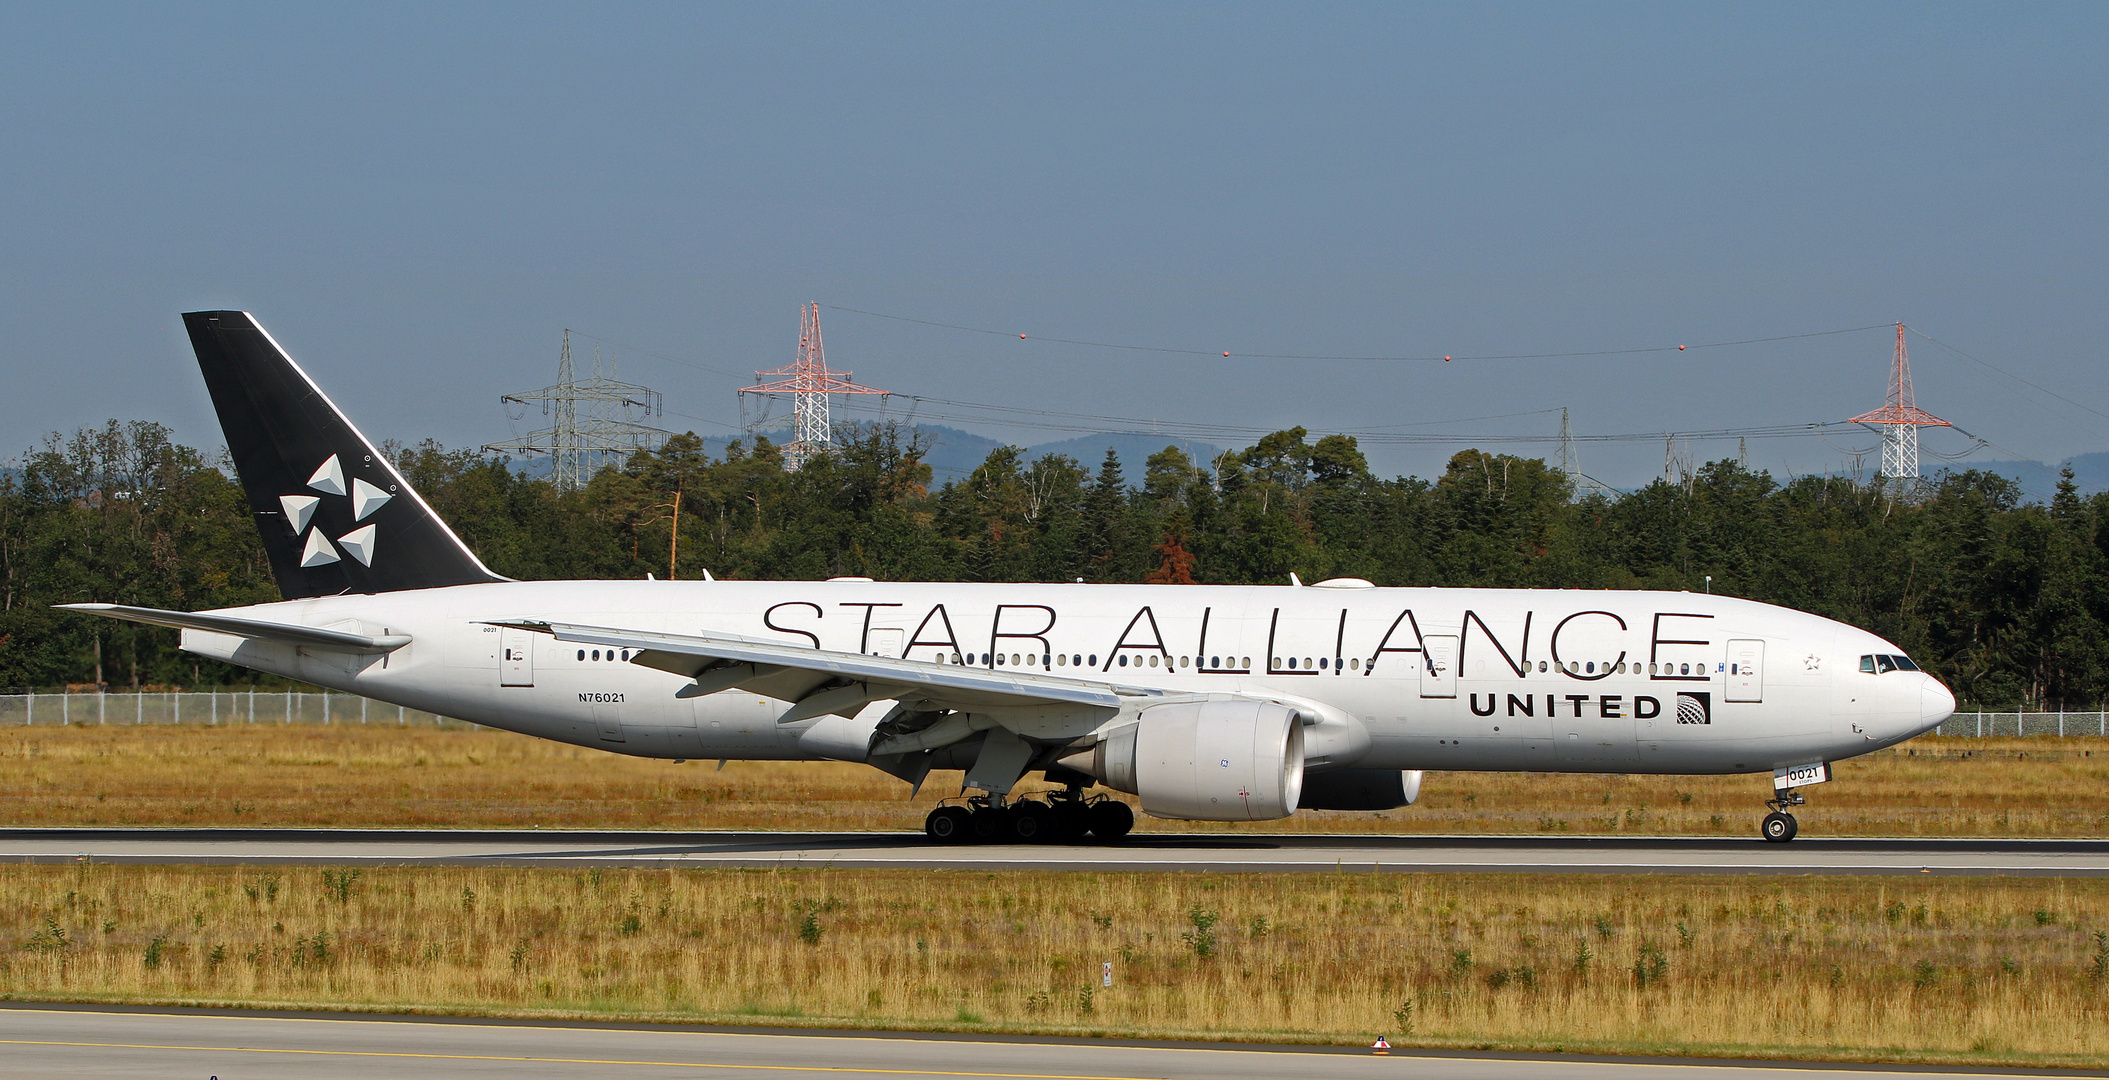 UNITED AIRLINES / STAR ALLIANCE Livery